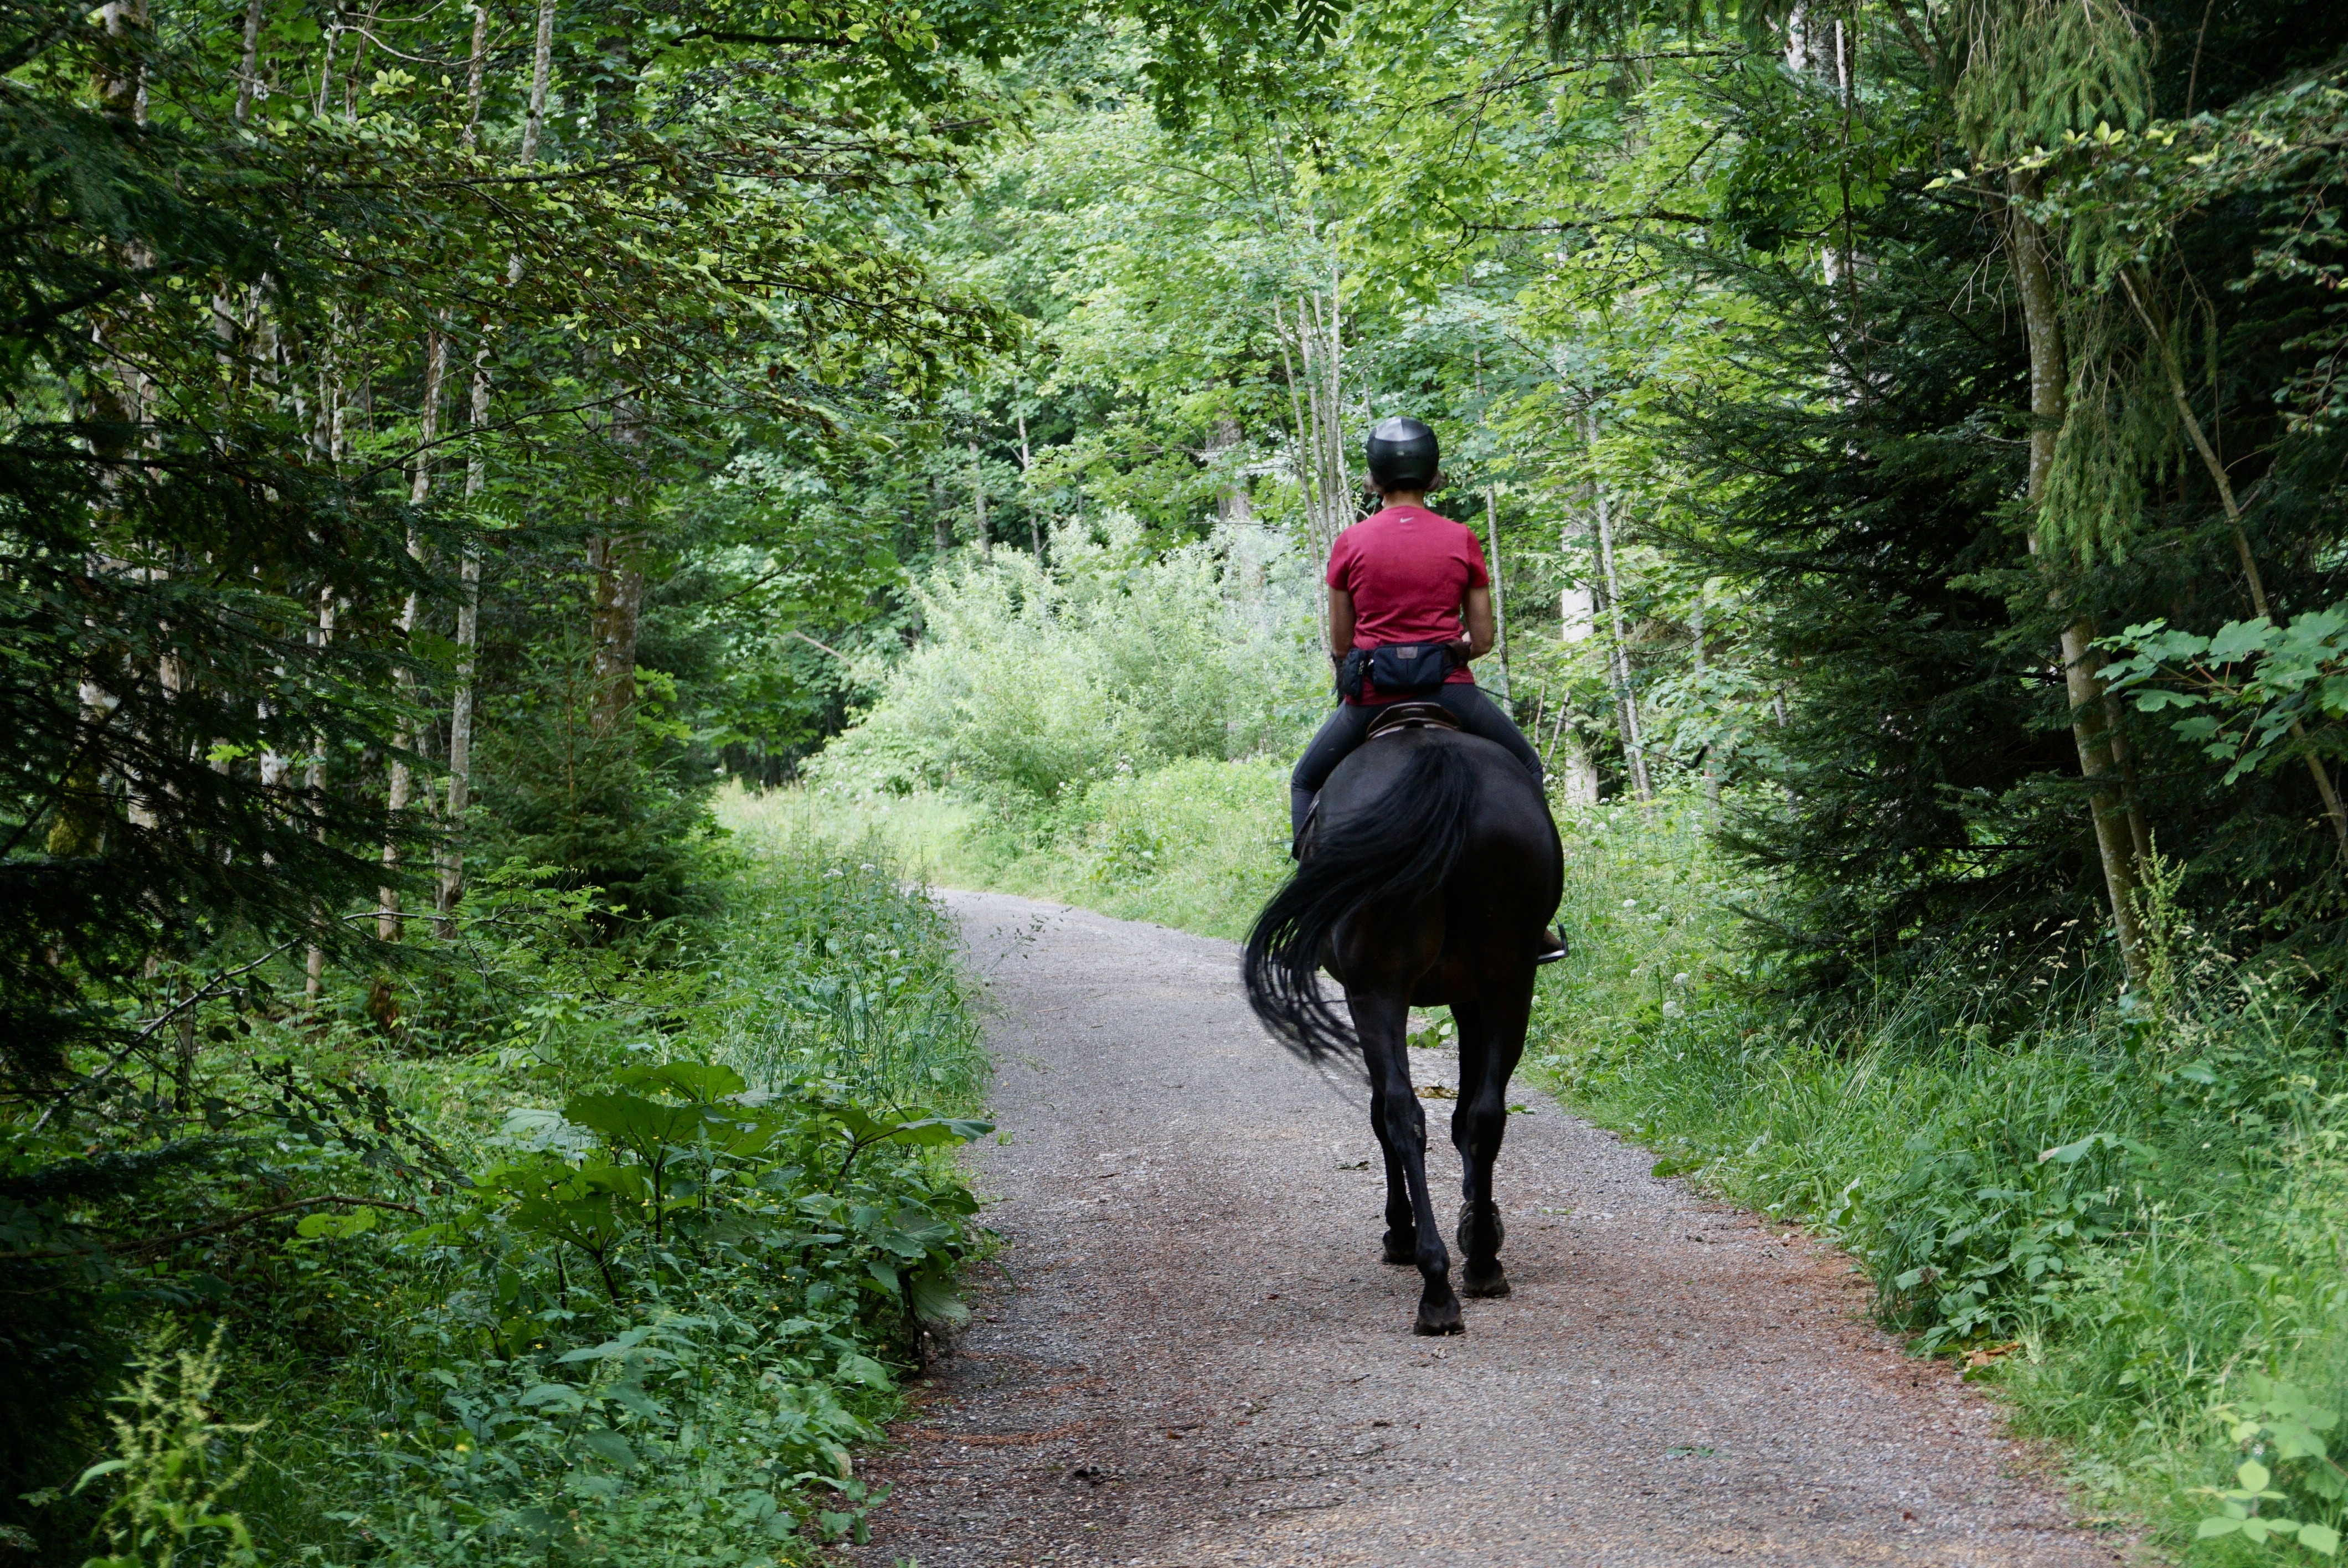 Uncover Langley's top horse riding trails and explore the scenic beauty of the area on horseback.